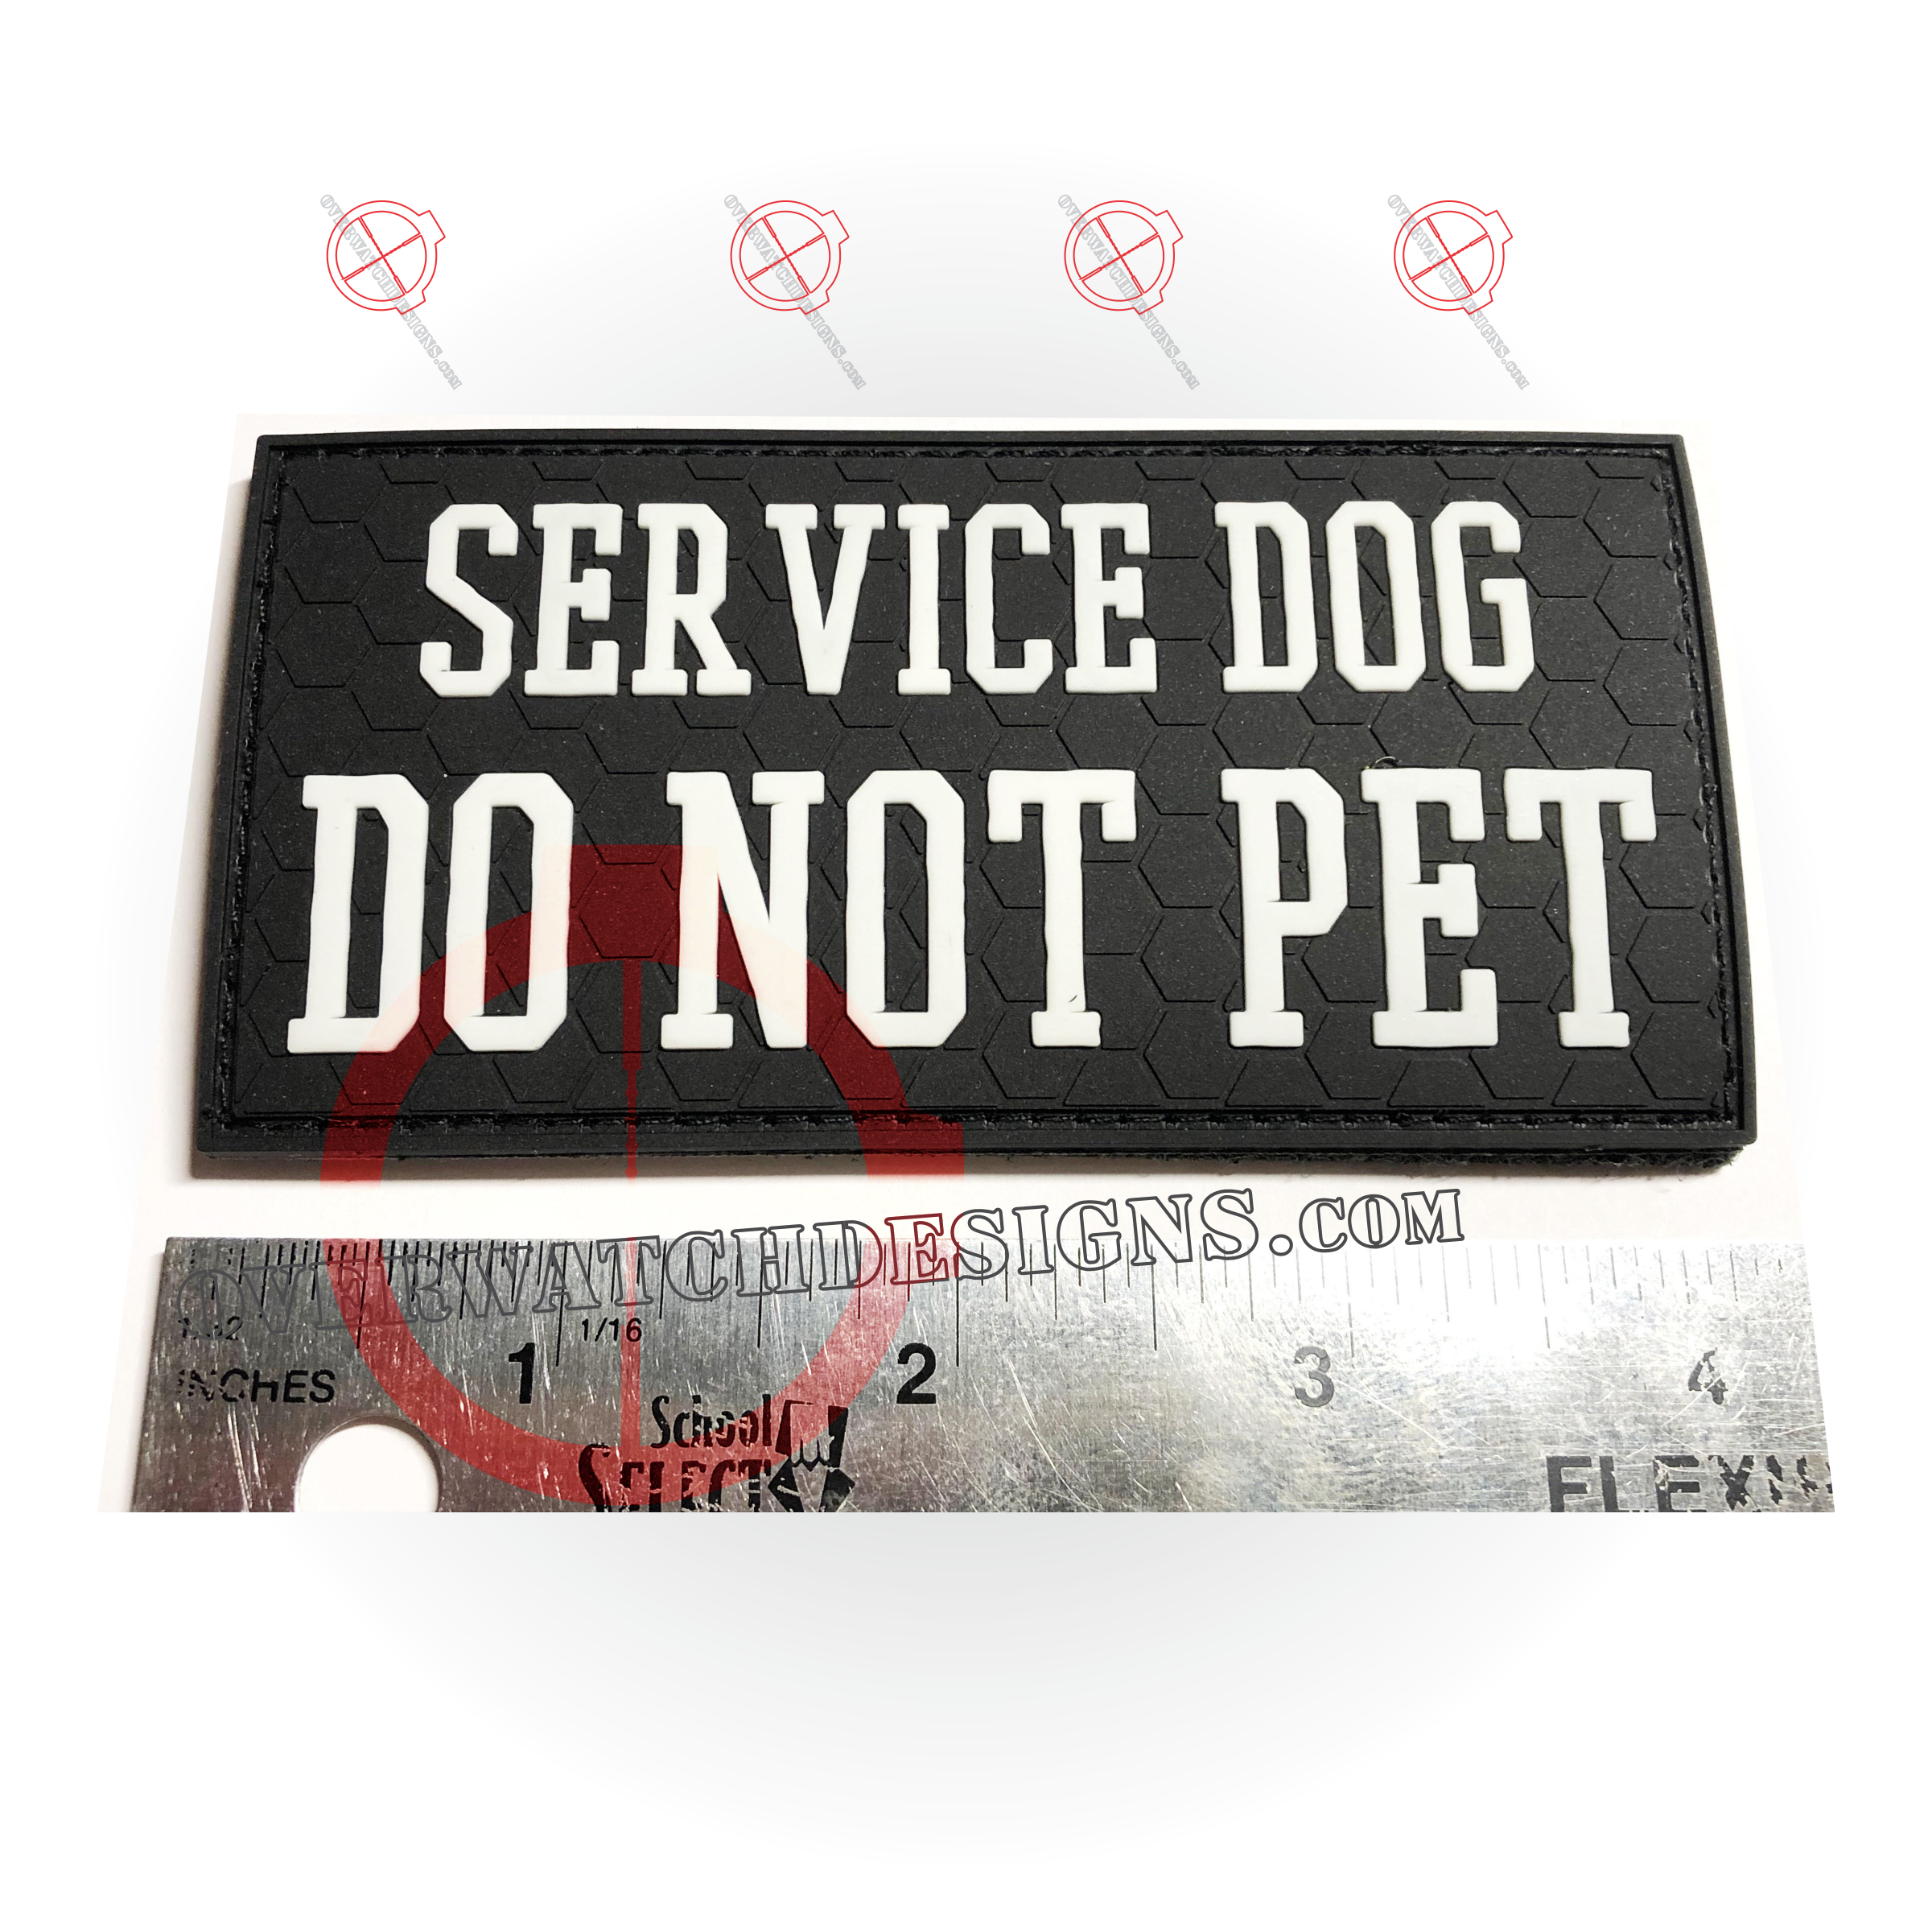 Leashboss Service Dog Patches for Harness, Velcro Patches for Dog Harness  or Vest, Do Not Pet Patch, Dog in Training, Service Dog, Emotional Support